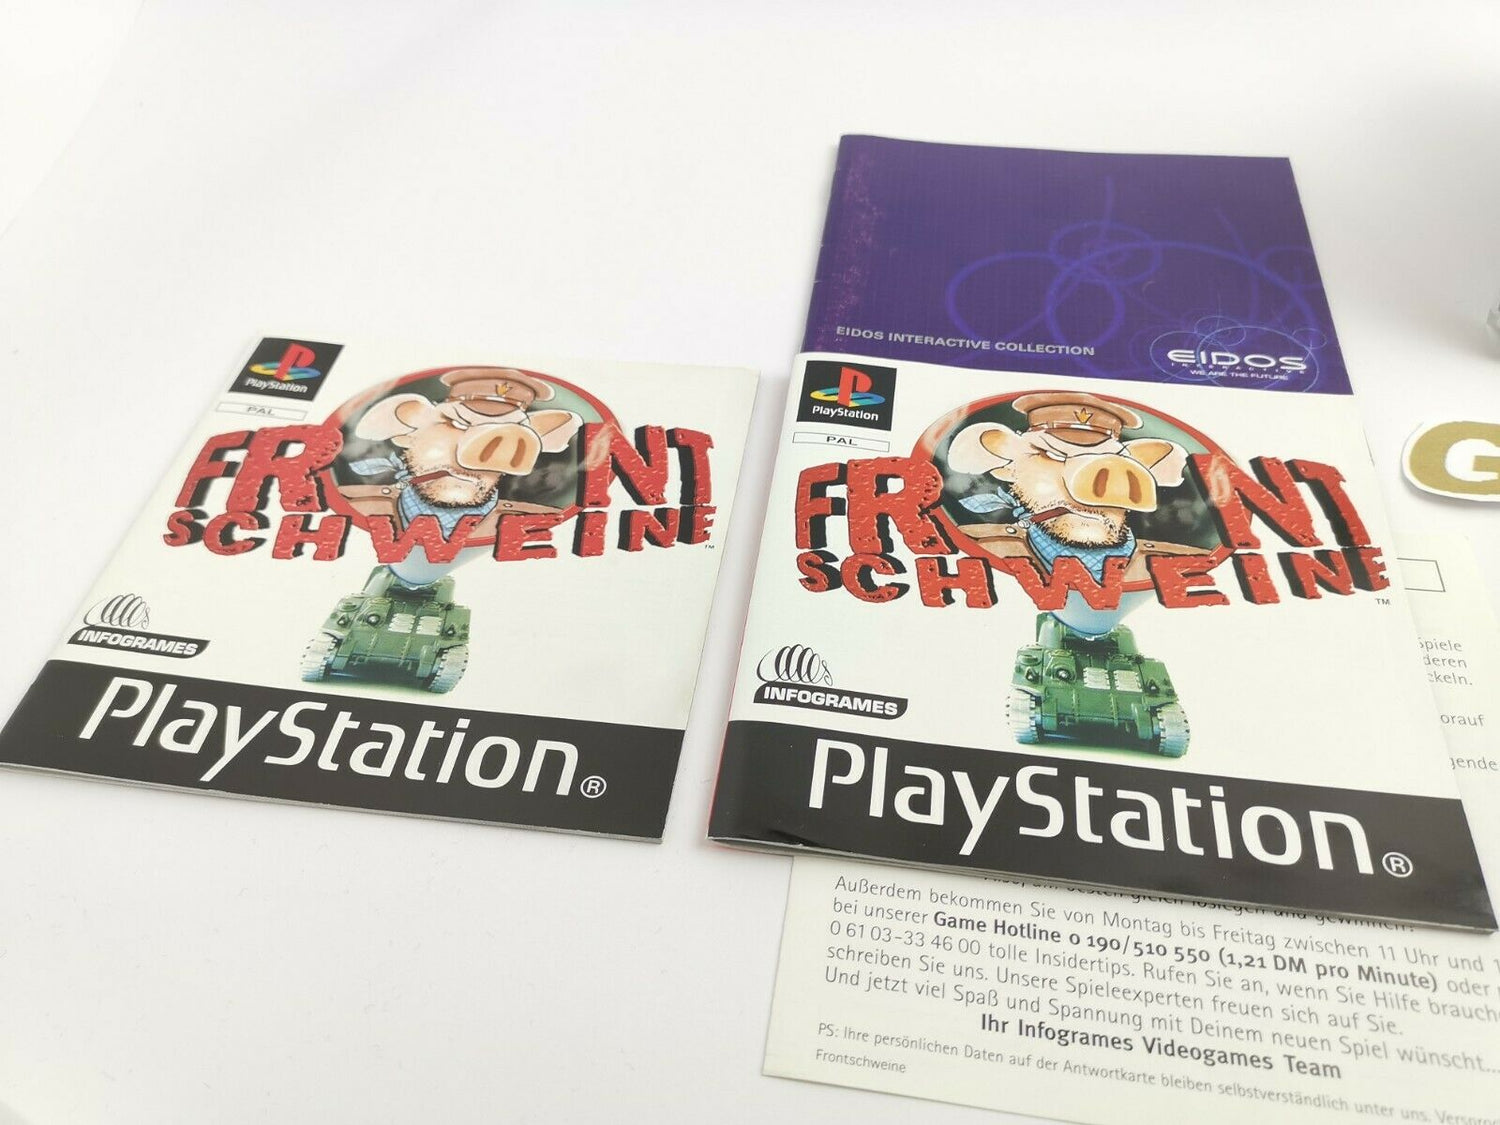 Sony Playstation 1 game 